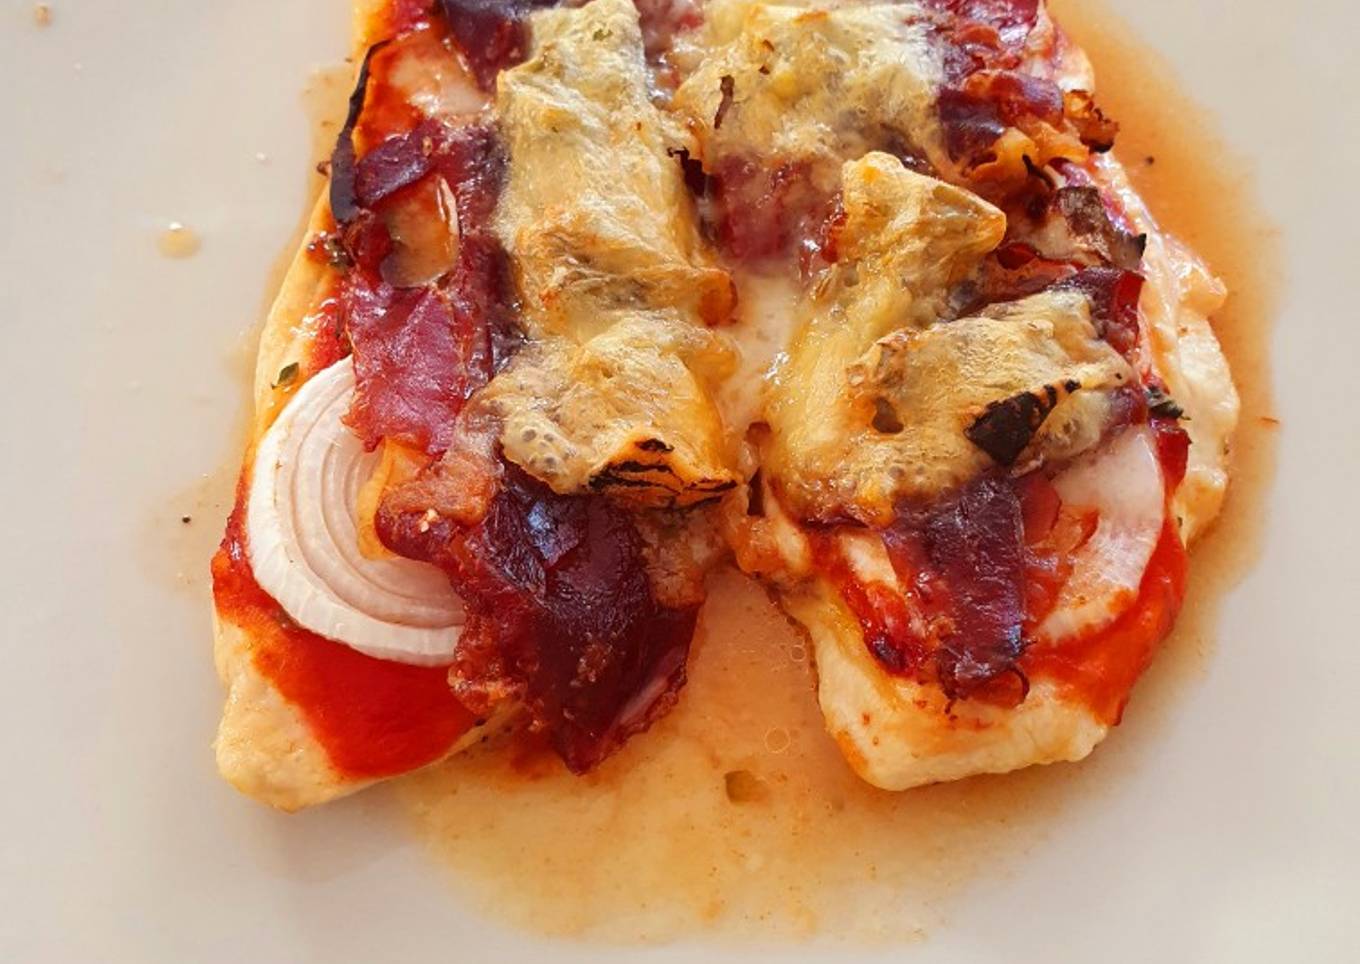 10-minute chicken "pizza" with jamón ibérico and gorgonzola